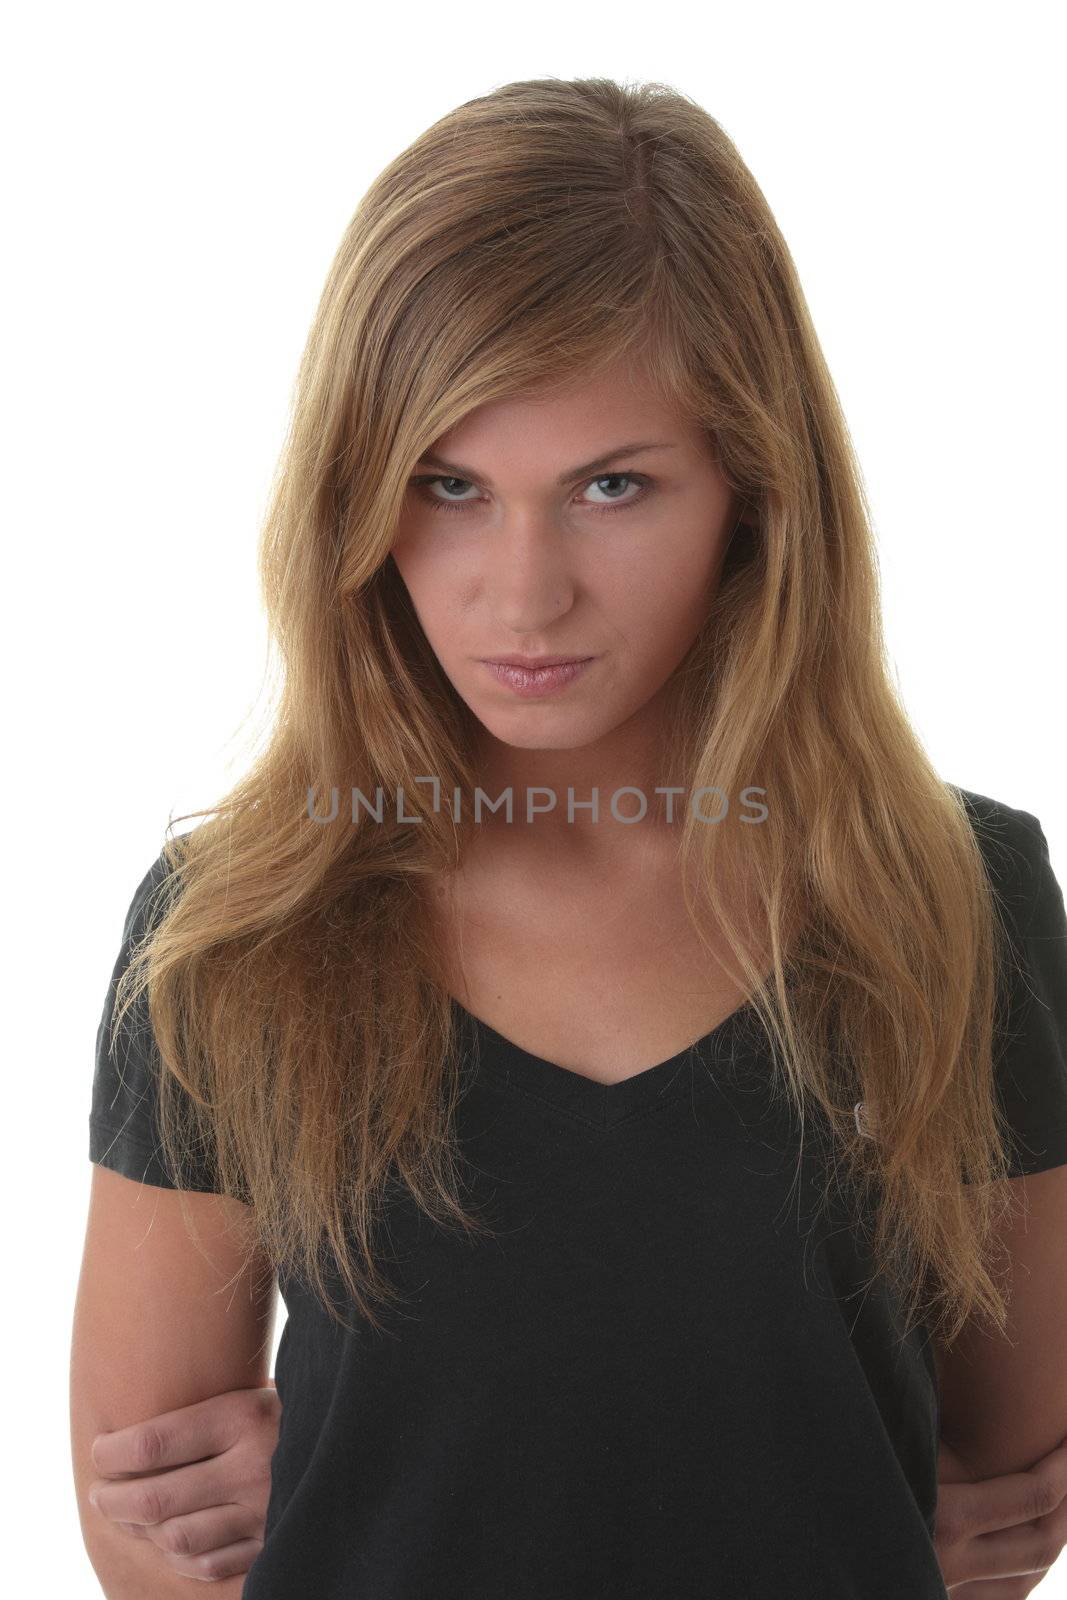 Blond young woman (student) portrait iith face expression isolated on white background